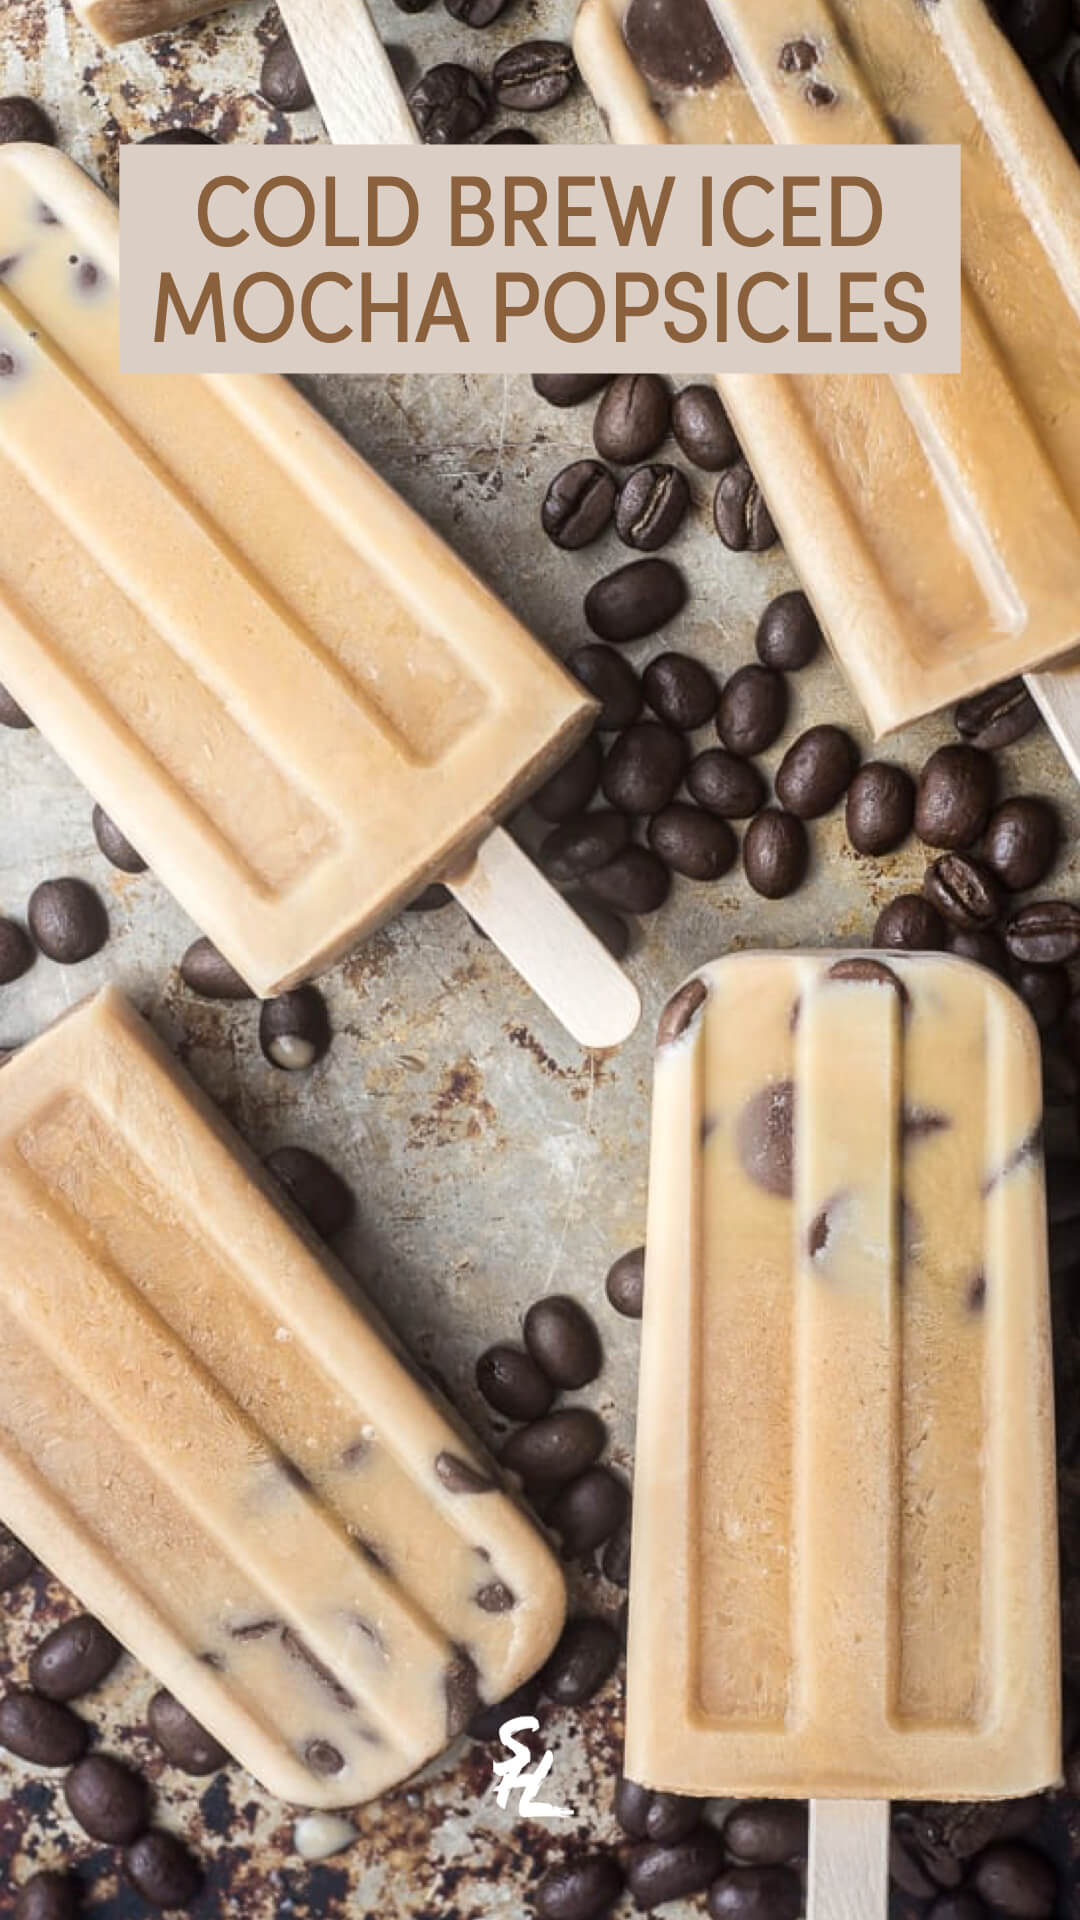 Cold Brew Iced Mocha Popsicles Recipe